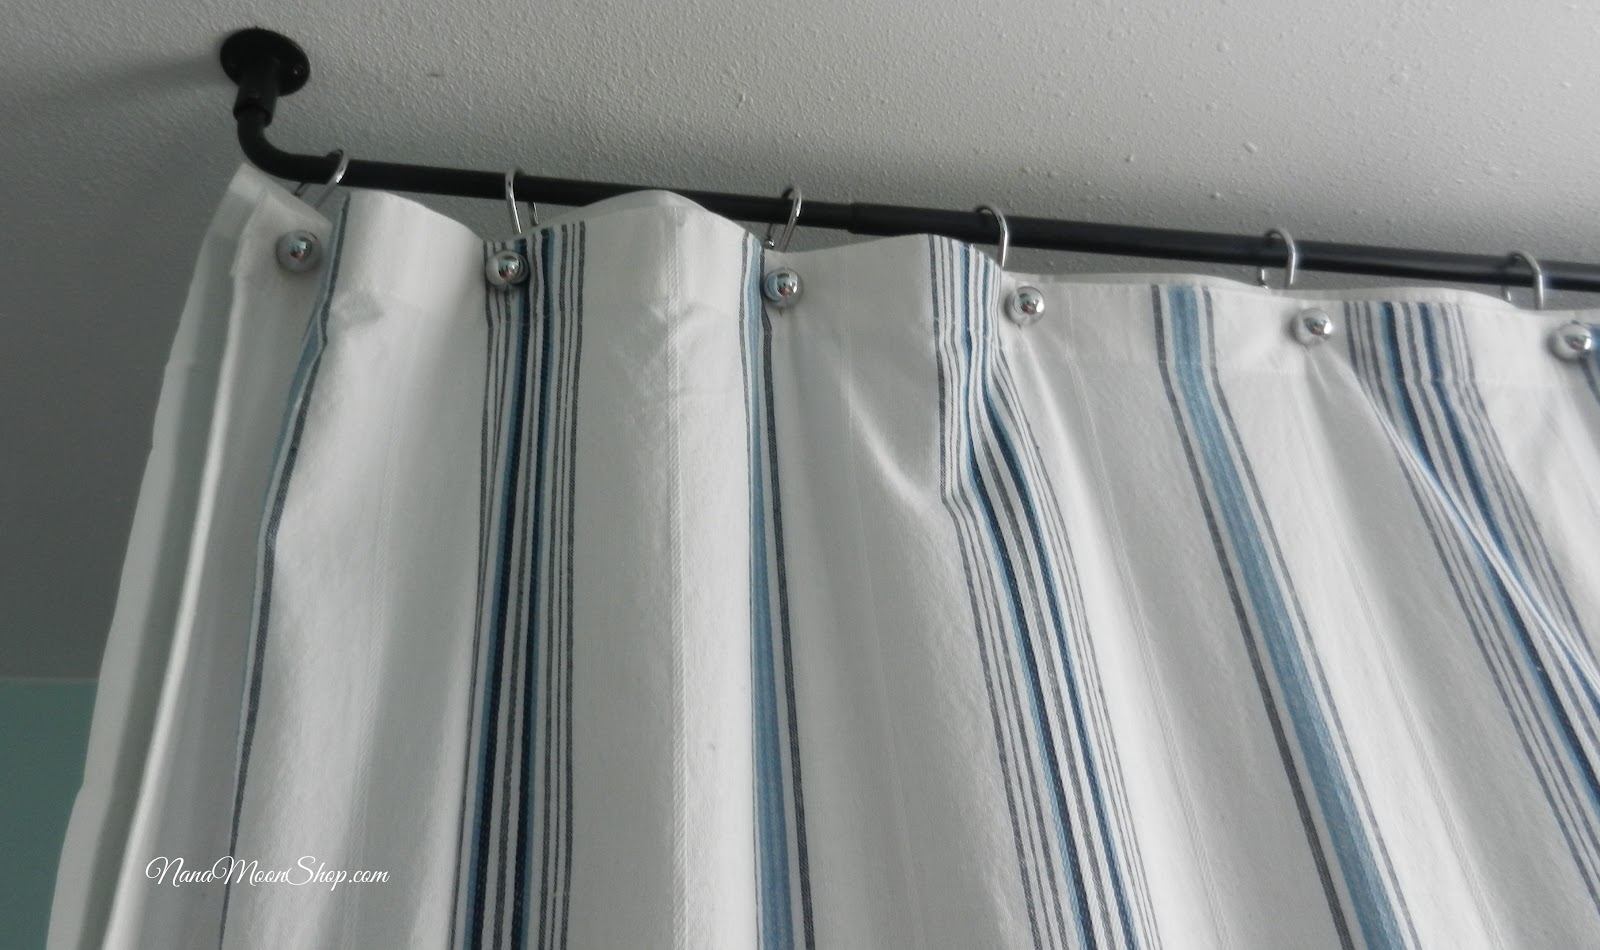 Ceiling Support Rod For Shower Curtain Clawfoot Tub Shower Curtai